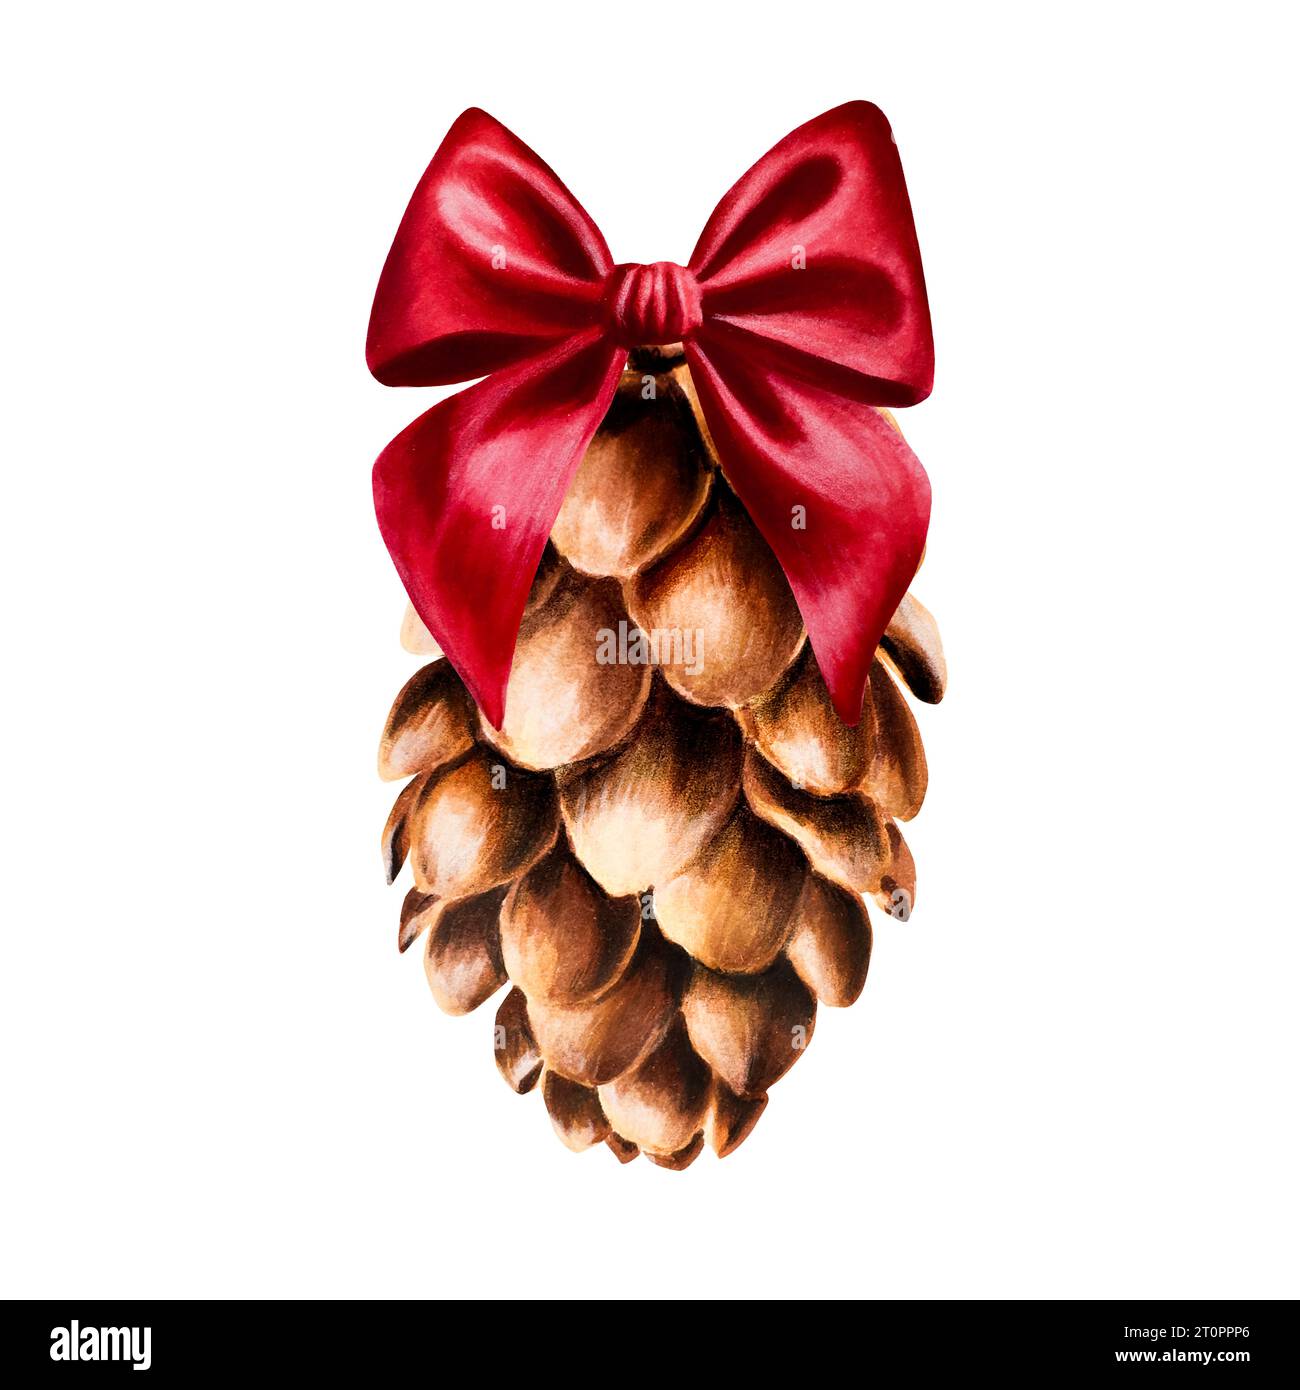 Watercolor hand drawn cone with red satin bow. New year botanical illustration of pine, spruce, cedar, fir and larch cone isolated on white background Stock Photo